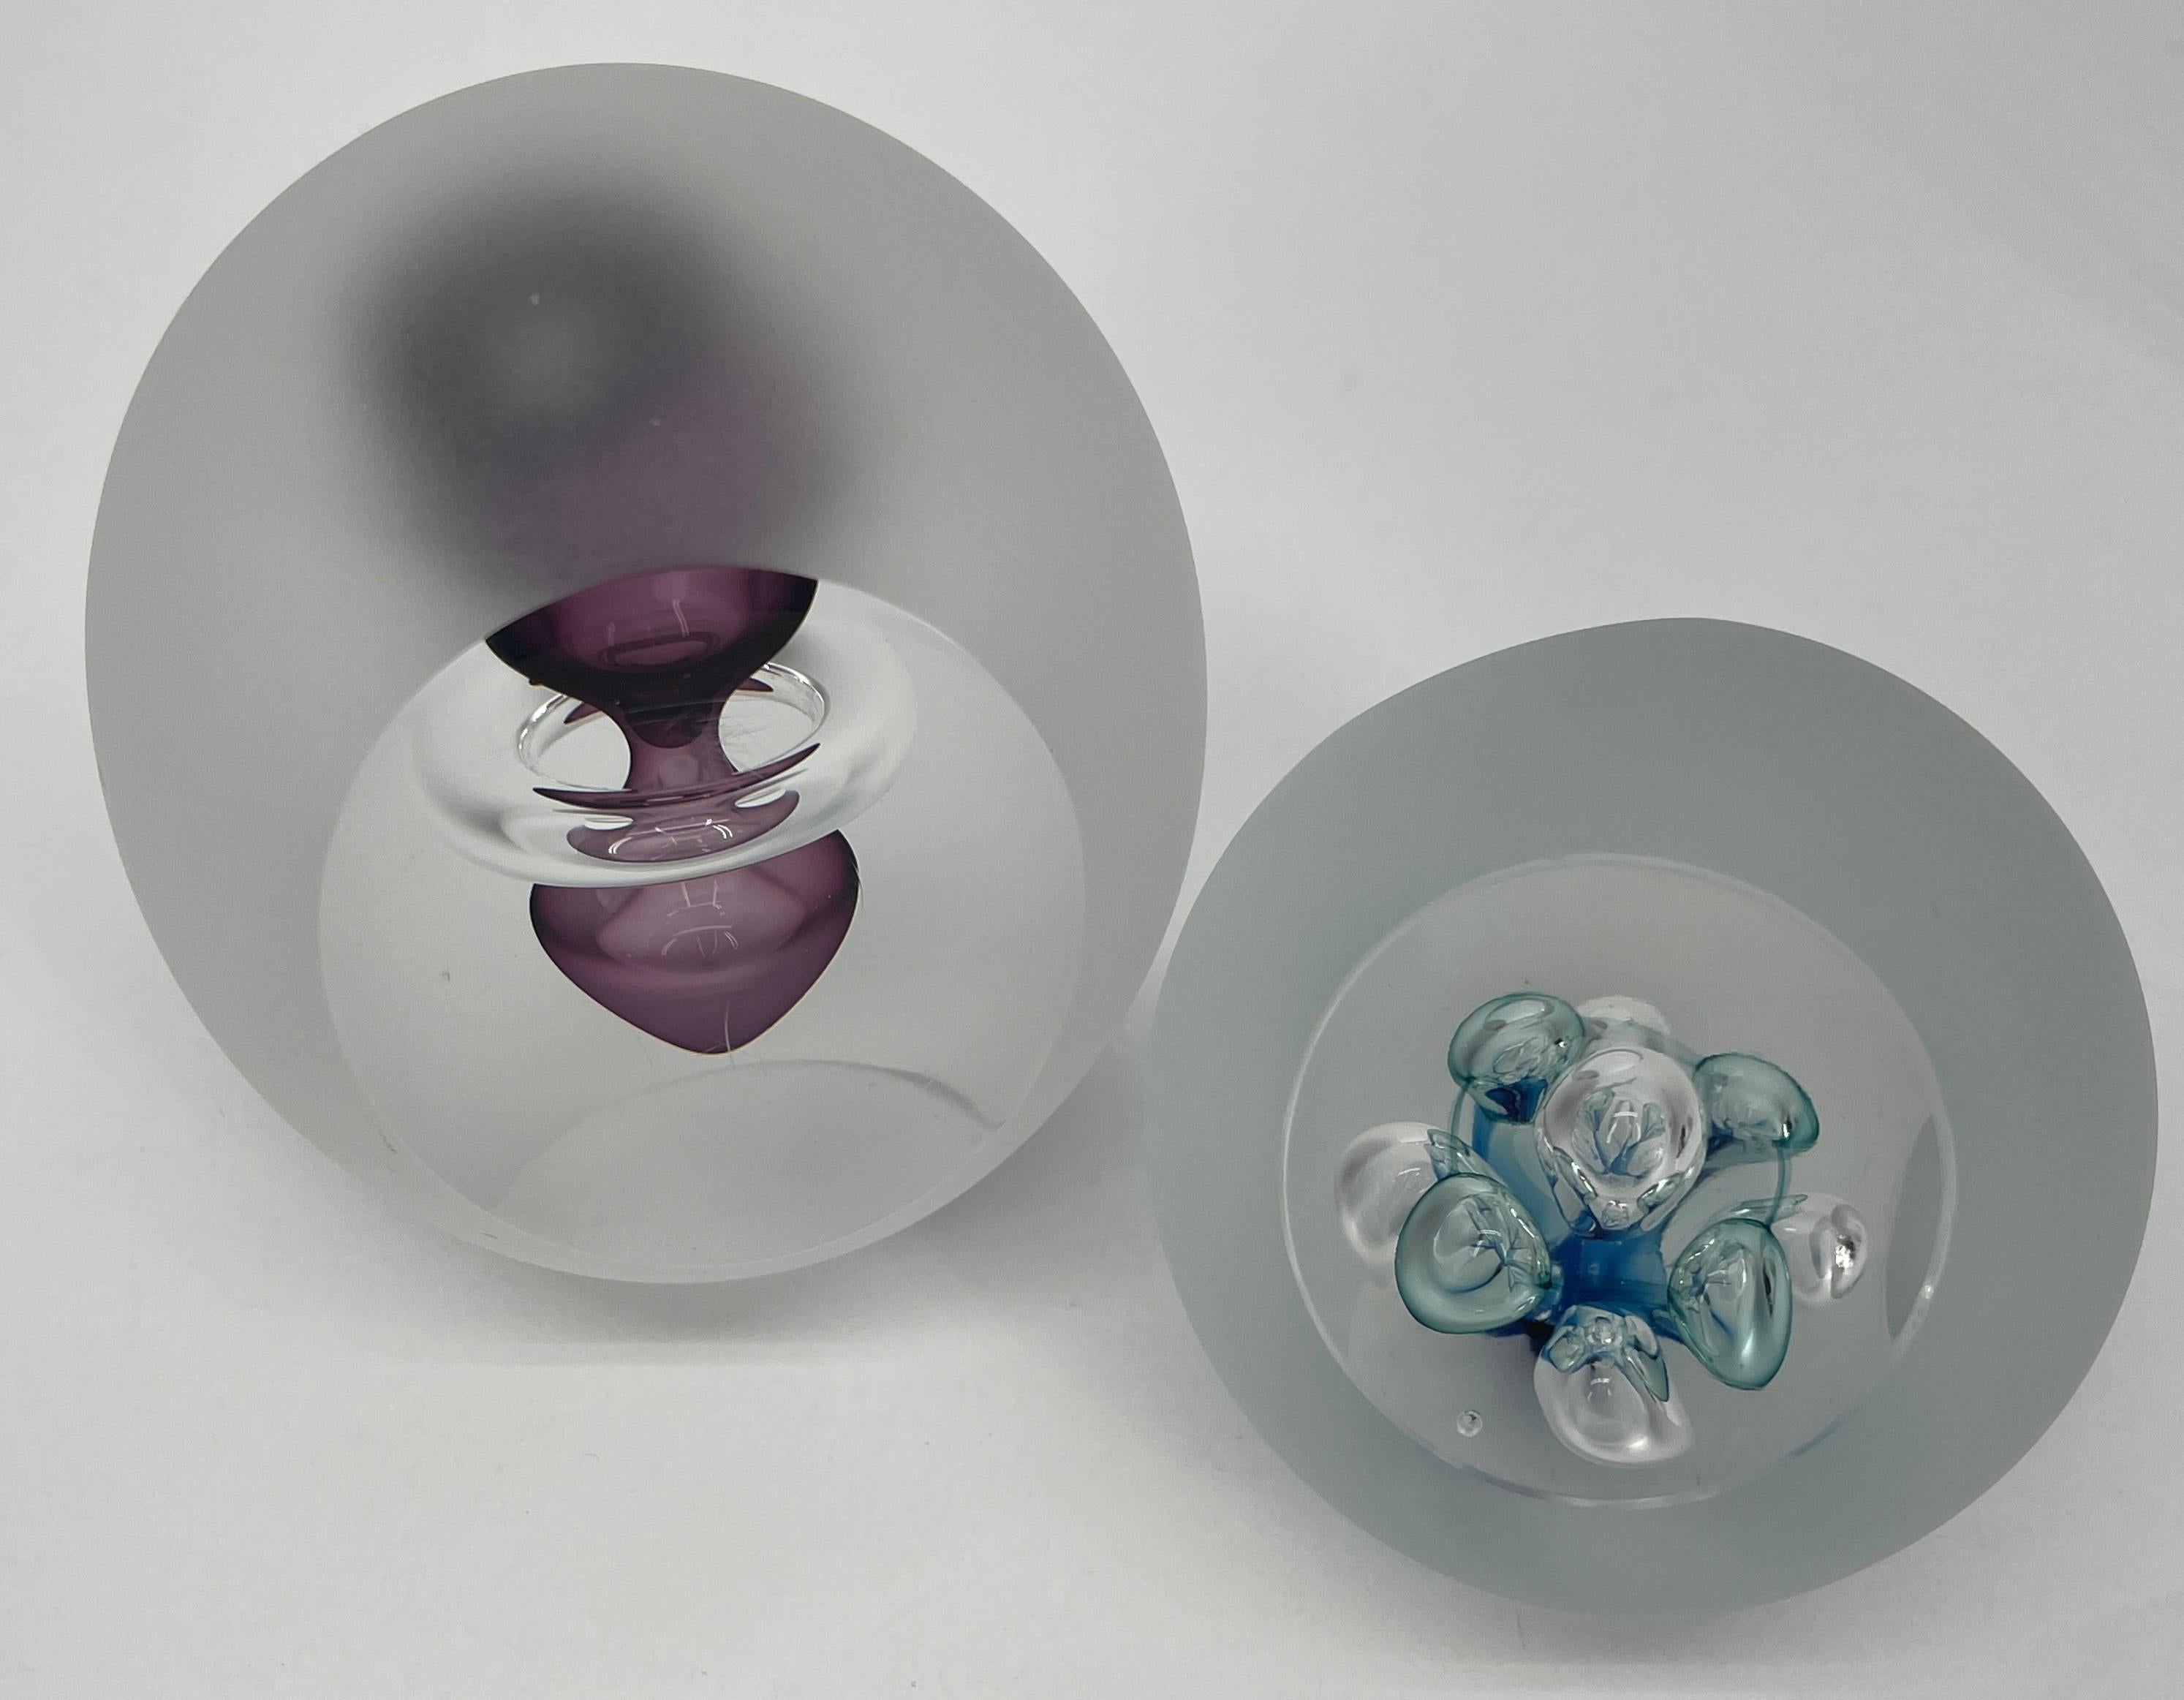 2 Modern Swedish Åhus glass paperweights. The signed paperweights are frosted glass with colorful interior and frosted glass surface. The larger piece is oval shaped with purple modern abstract floating glass interior. The smaller paperweight is